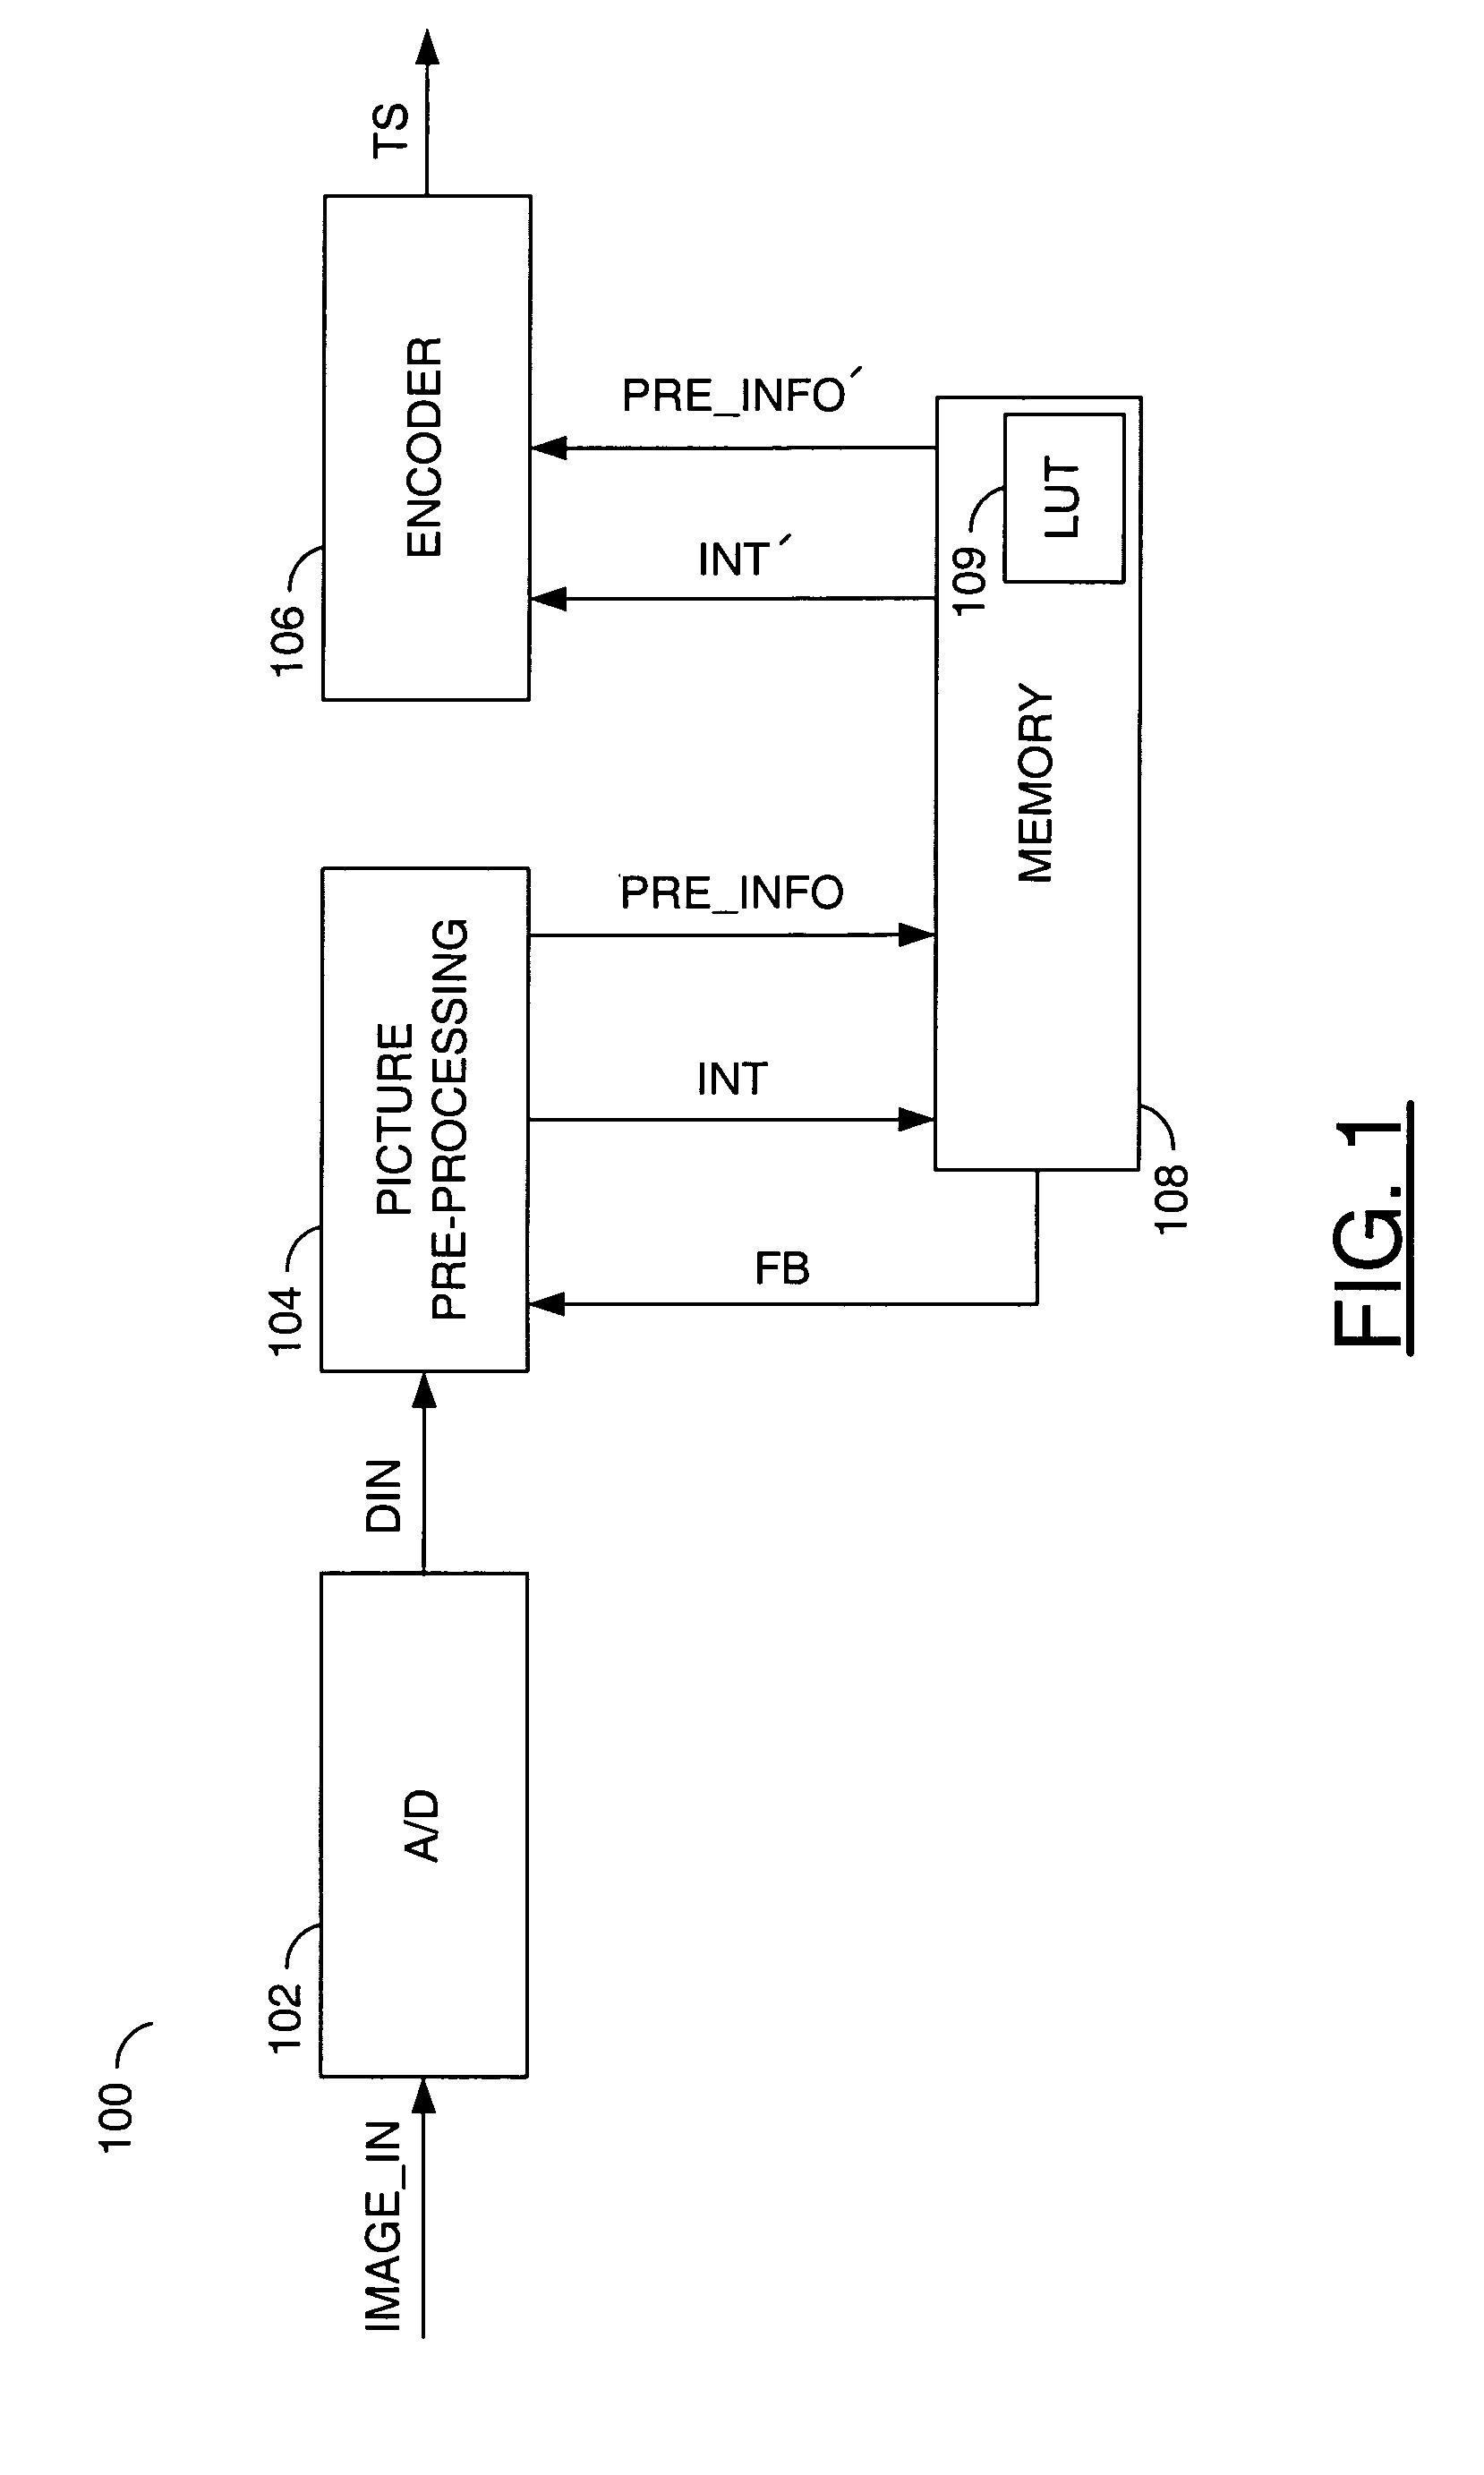 Method and apparatus for QP modulation based on perceptual models for picture encoding